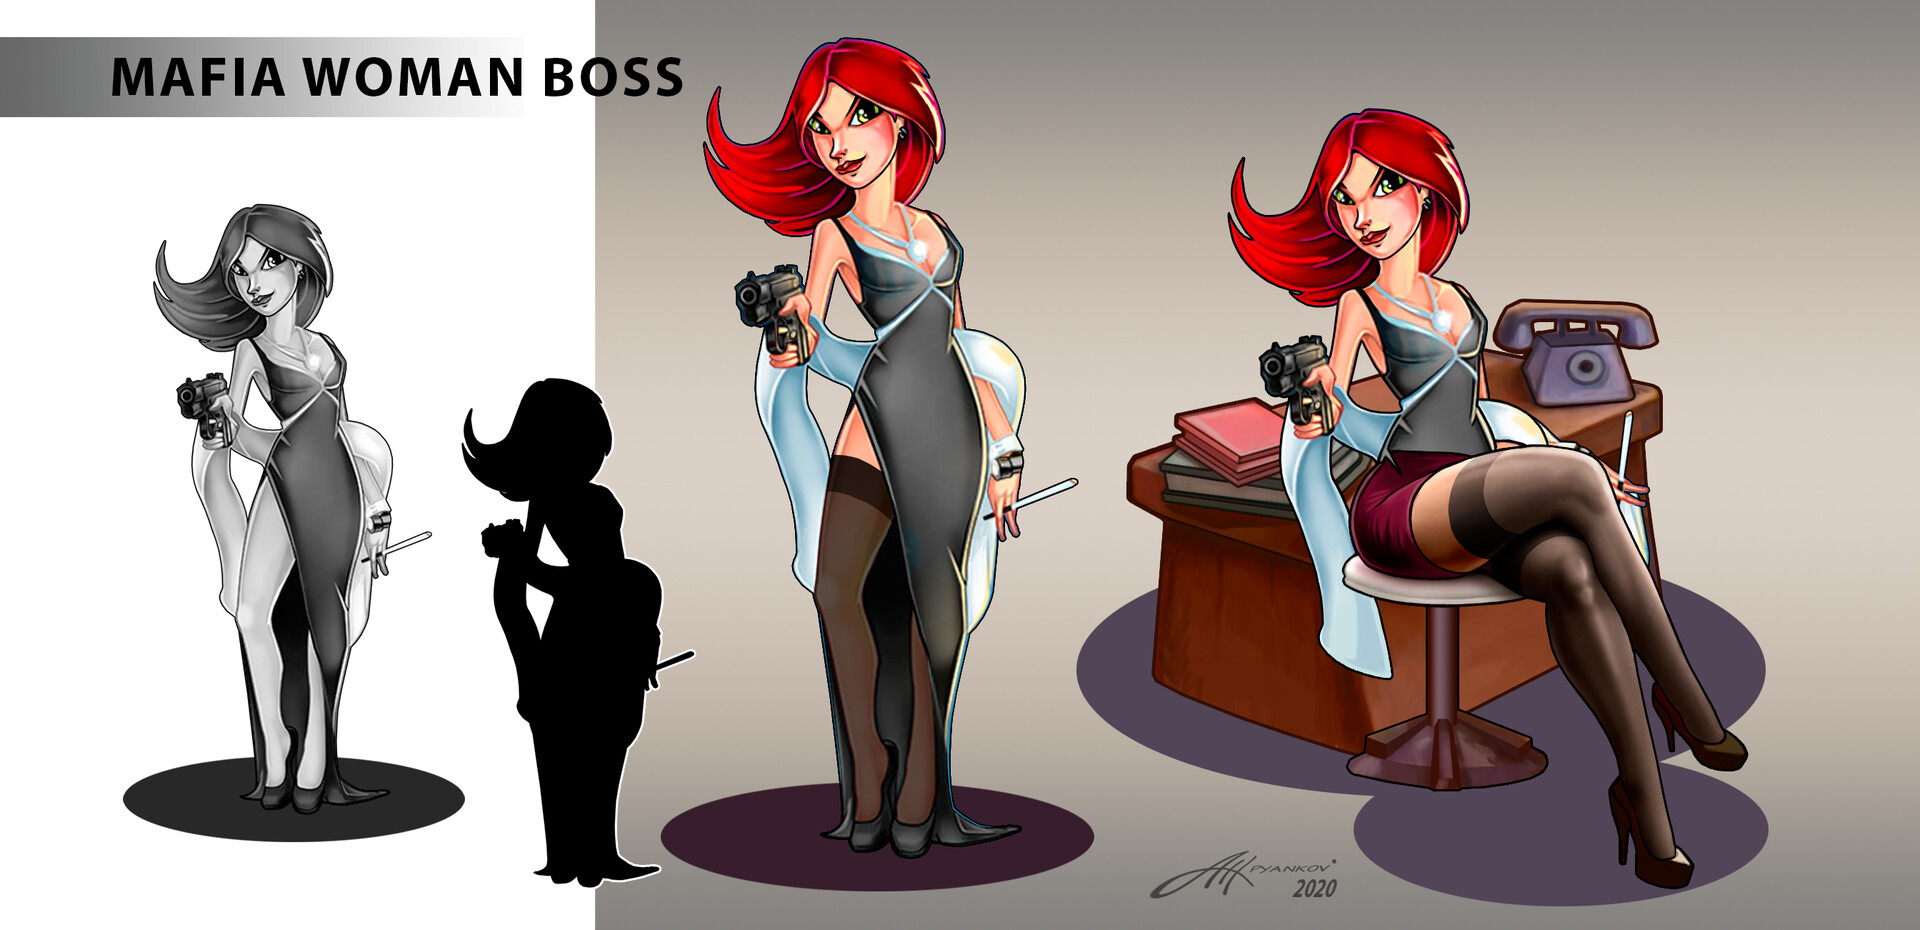 ArtStation - The female mafia boss character for the mobile game Mafia on iOS/Android.